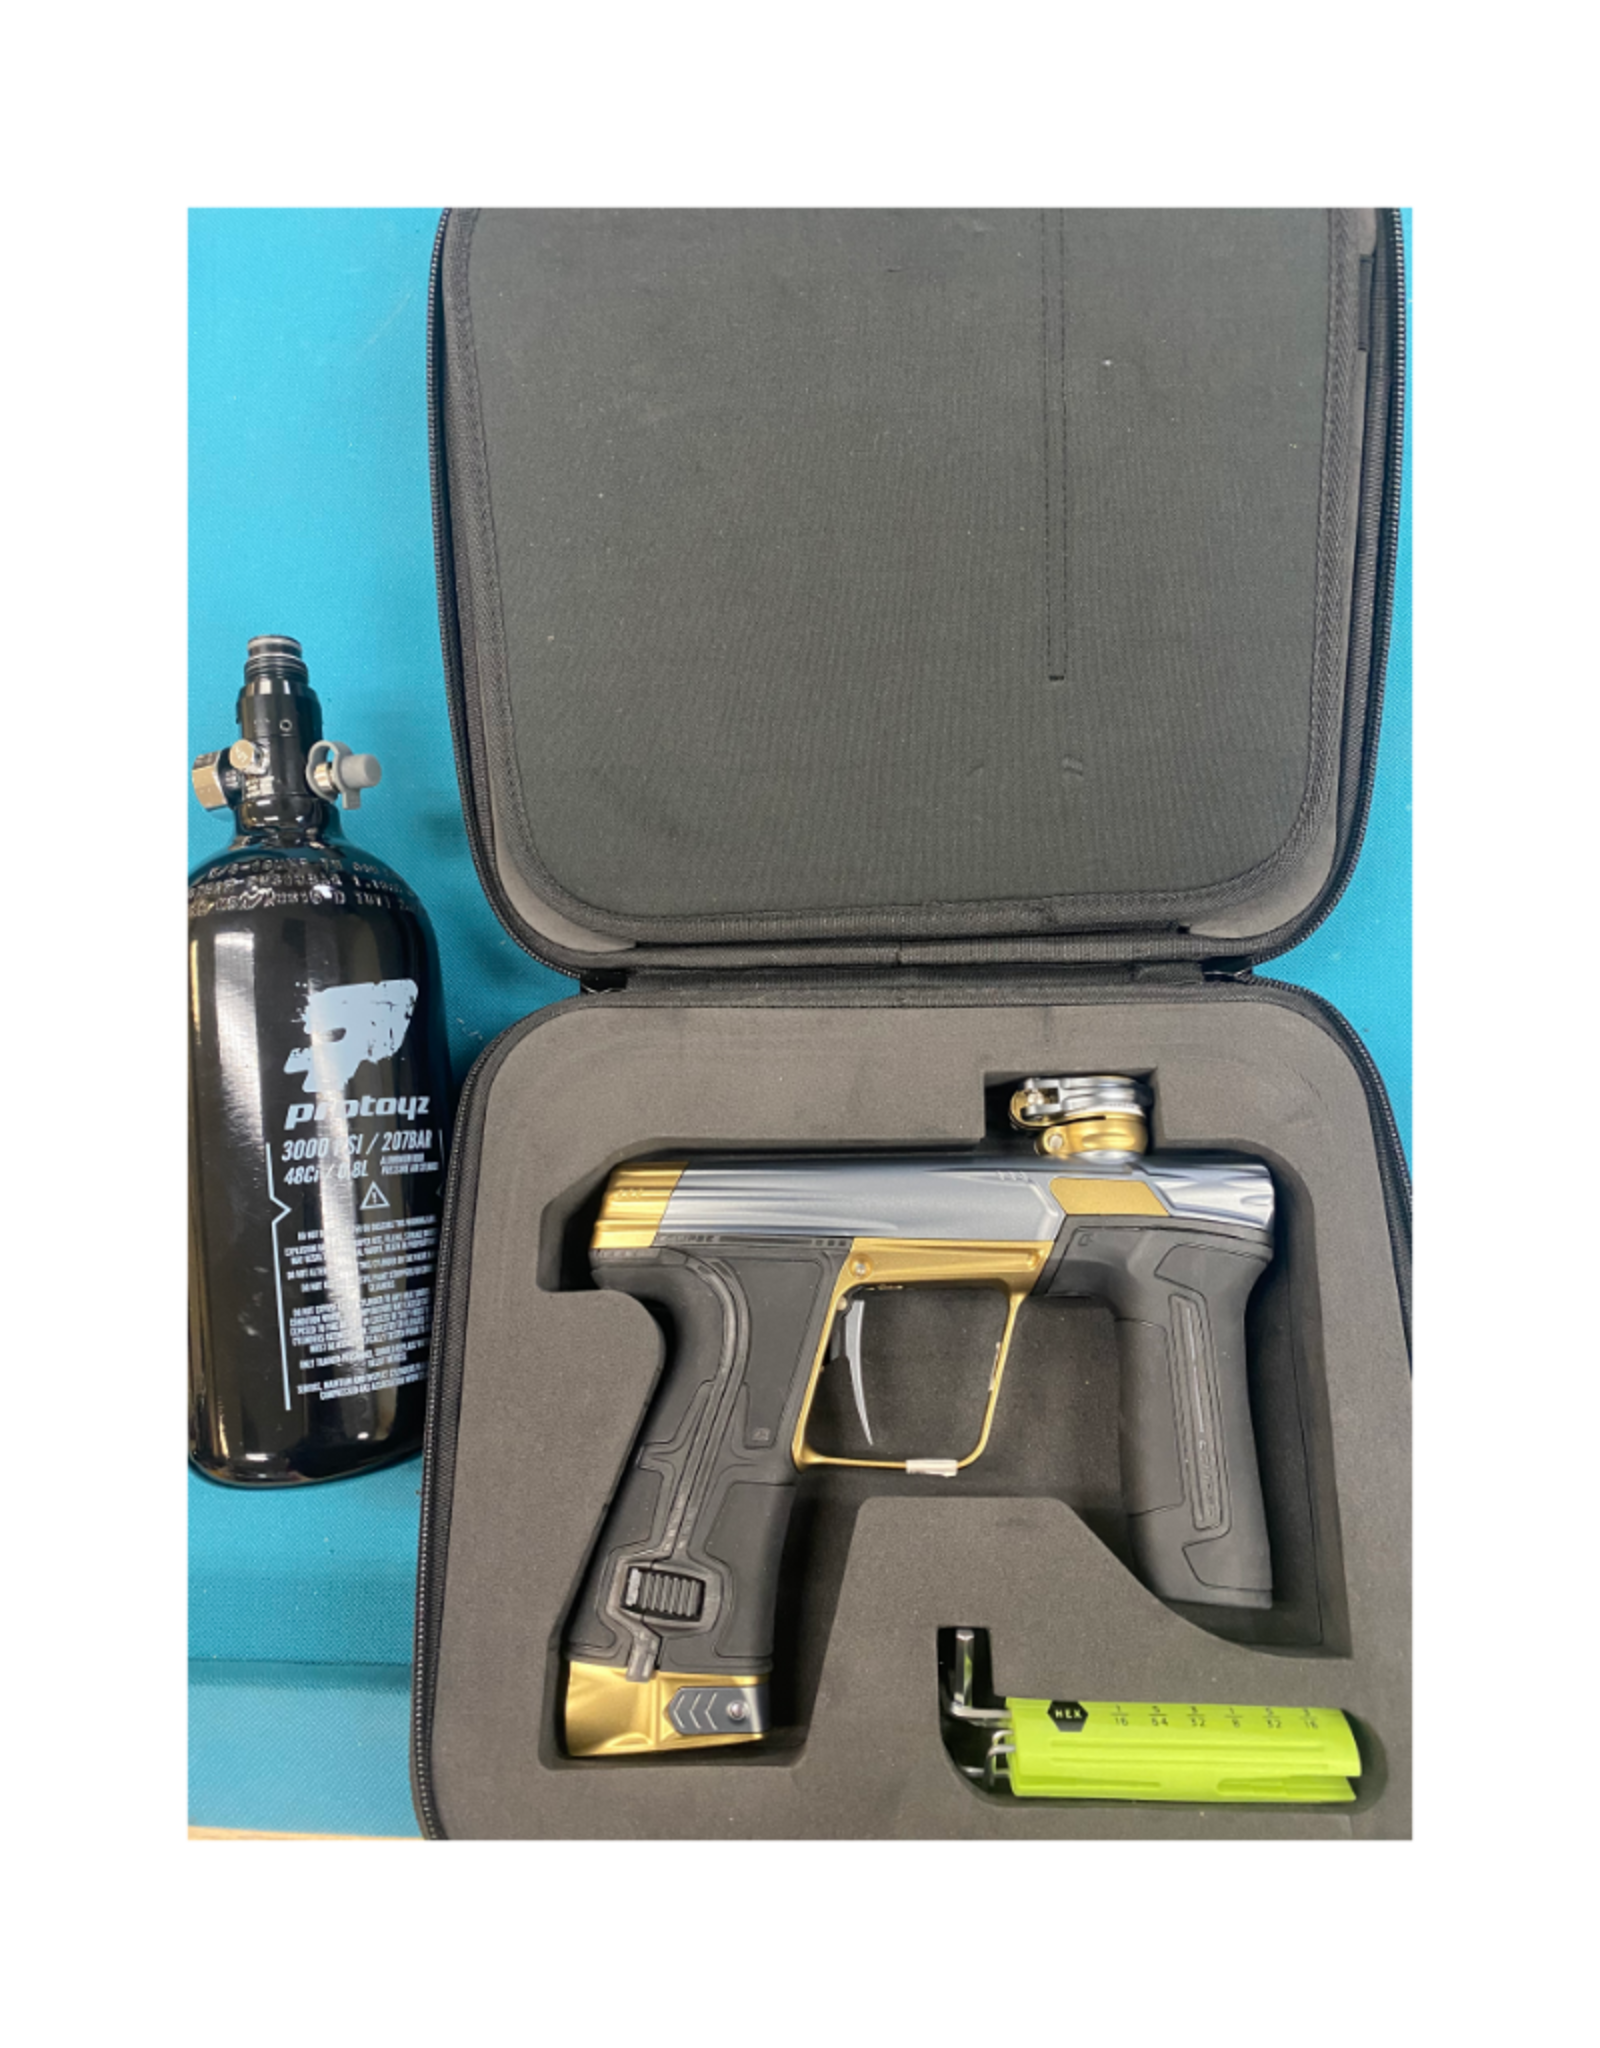 *PRE-OWNED* Eclipse Paintball Marker Kit